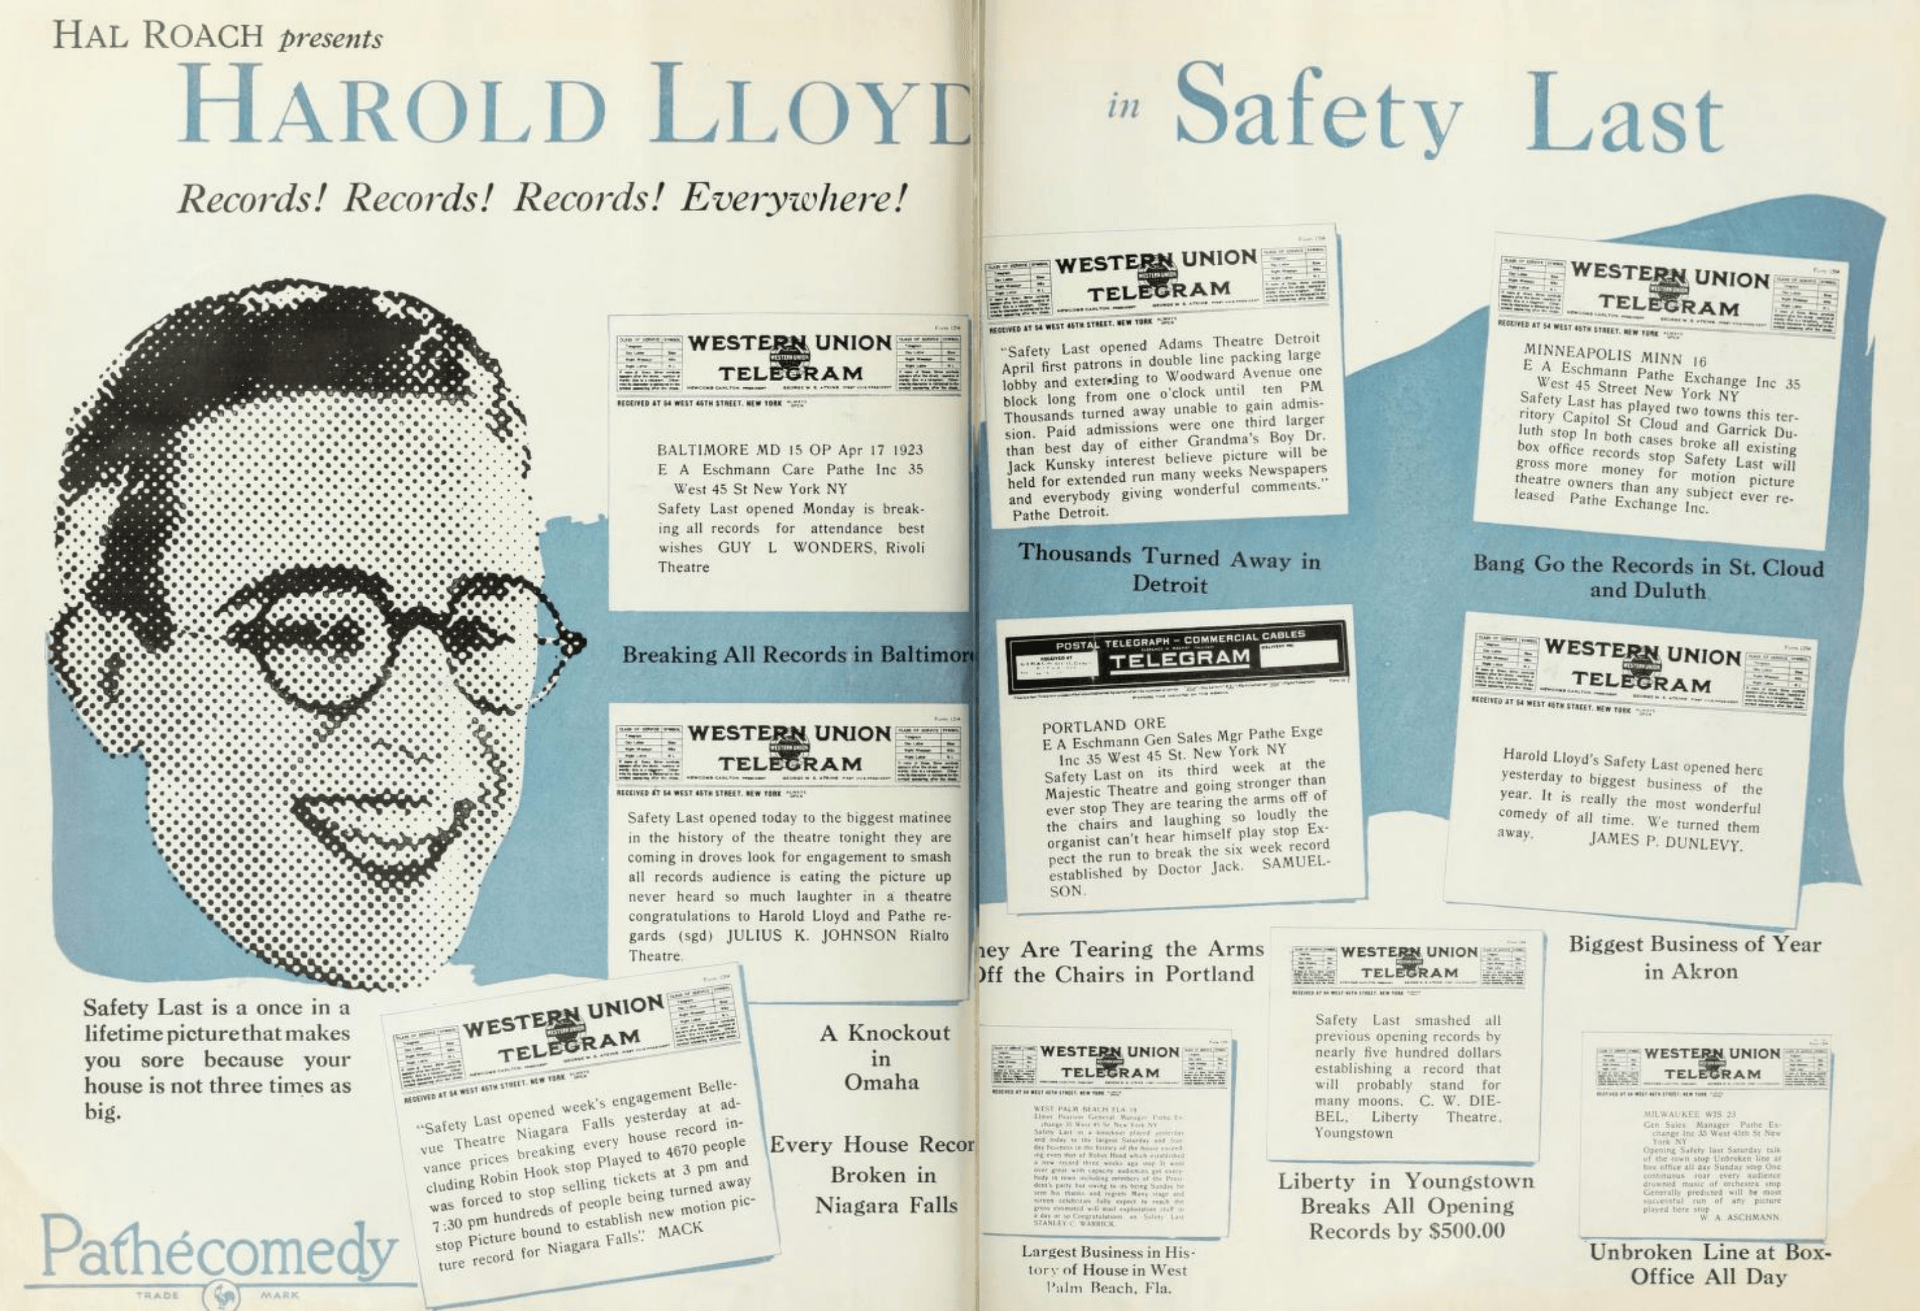 Advertisement in Film Daily, a motion picture trade publication, from June 10, 1923 recounting Safety Last's record breaking sales.